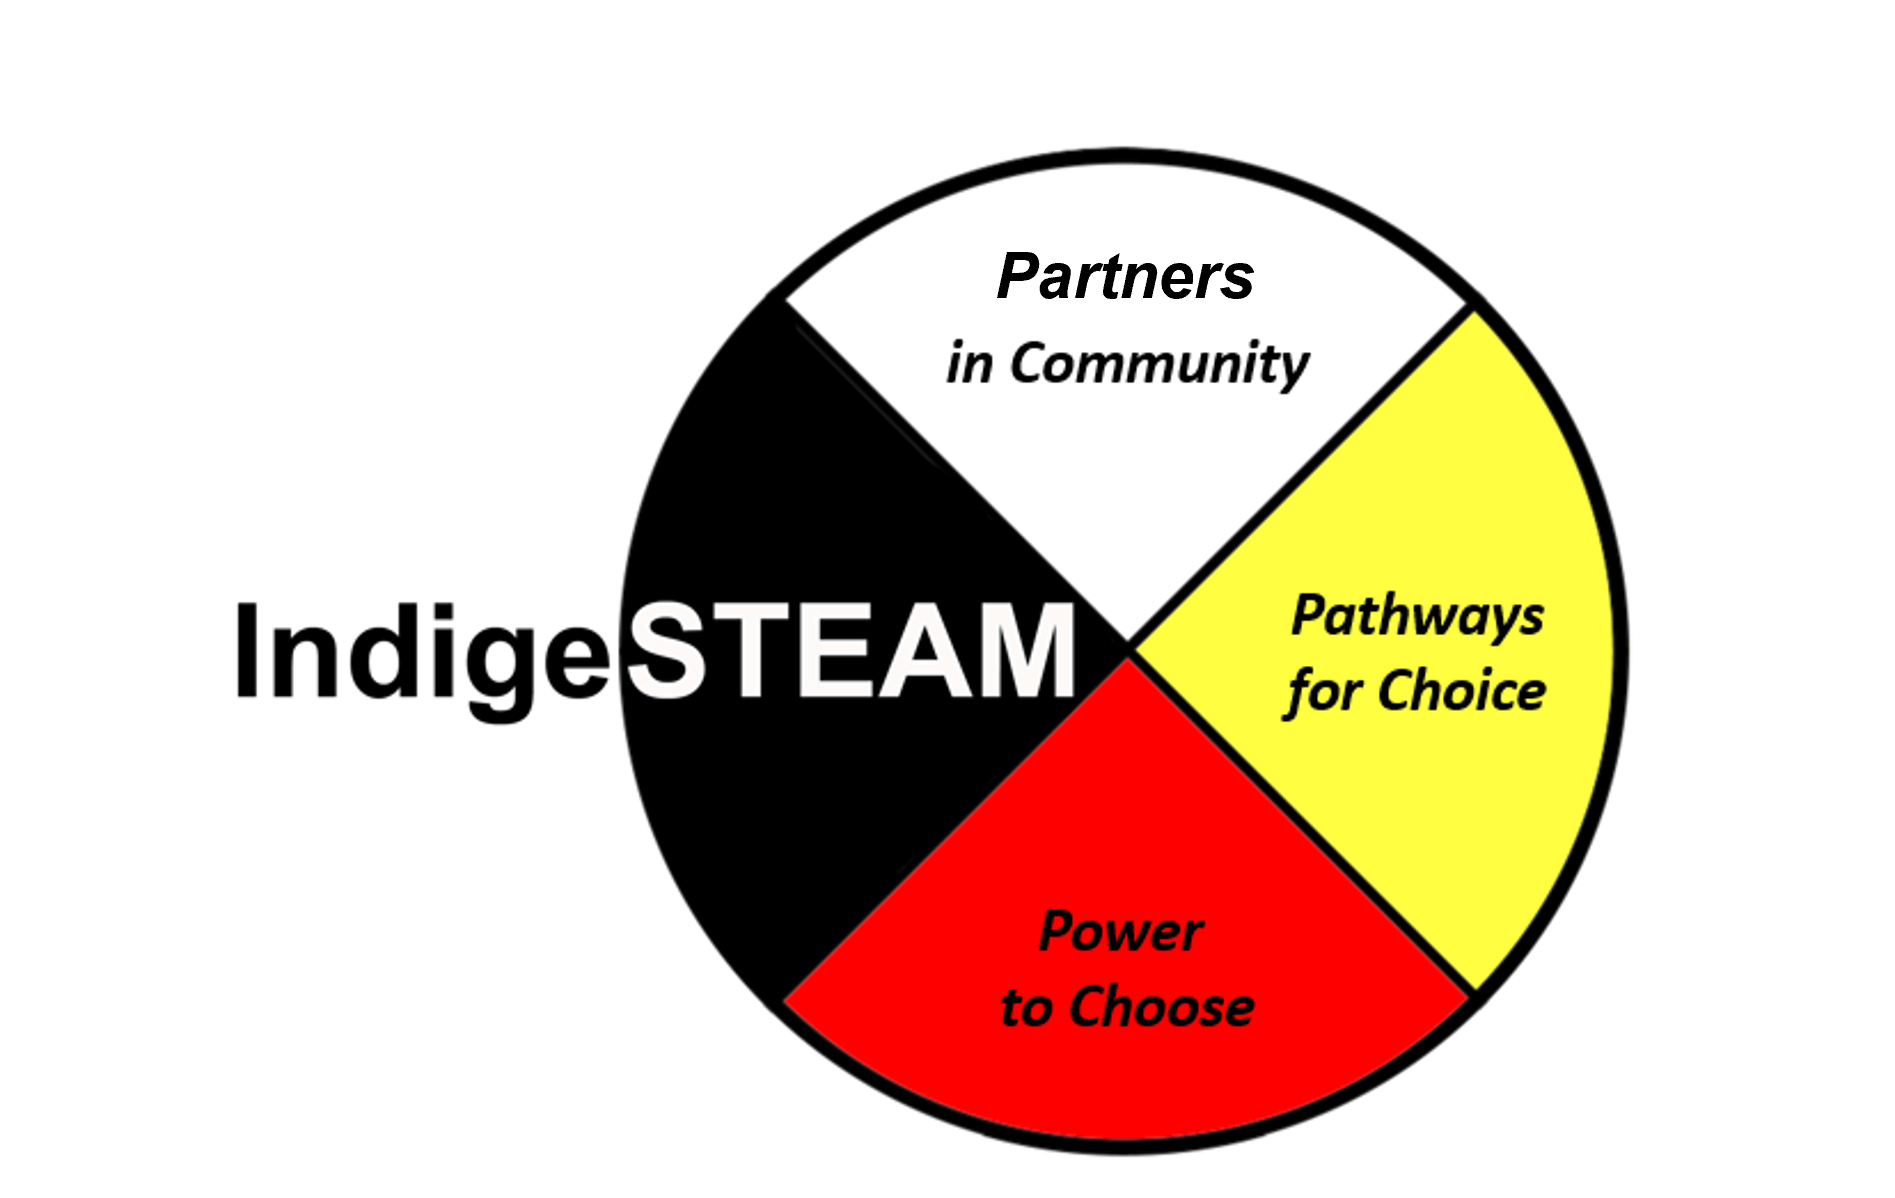 Pathways for Choice